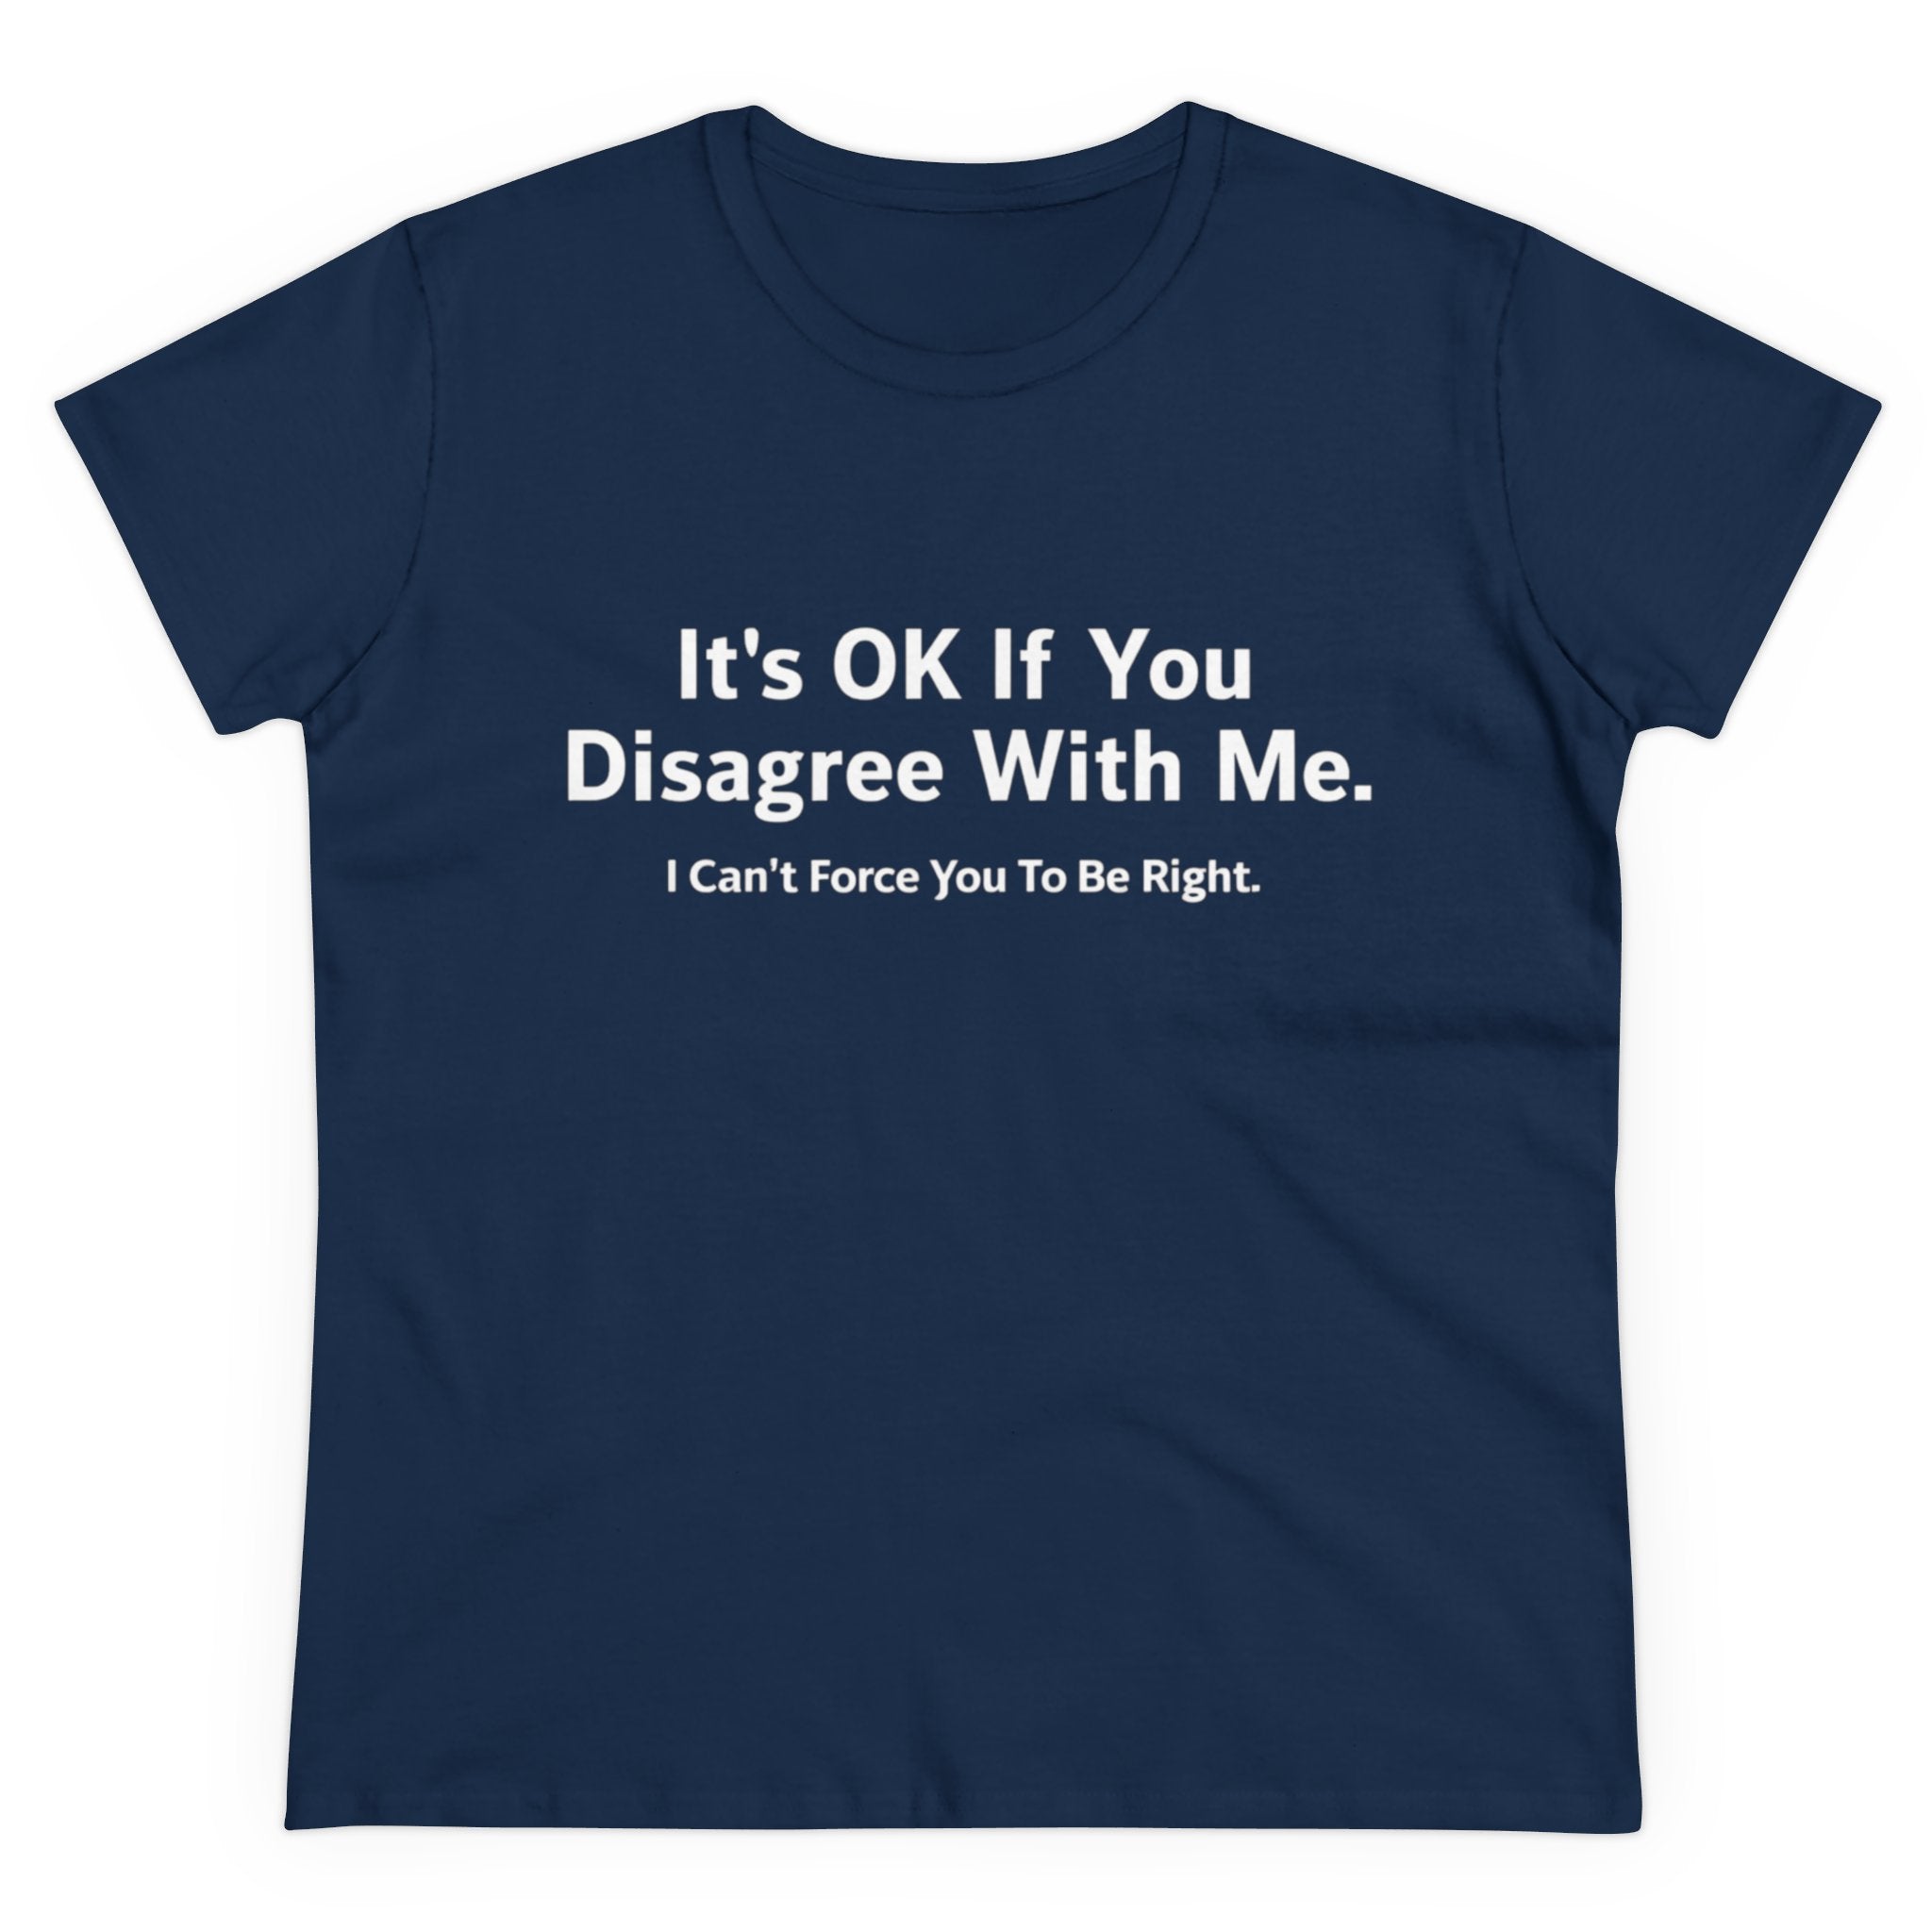 It's Ok If You Disagree With Me - Women's Tee, a navy blue shirt with the empowering print, "It's OK If You Disagree With Me. I Can't Force You To Be Right," in white, blending comfort & style effortlessly.